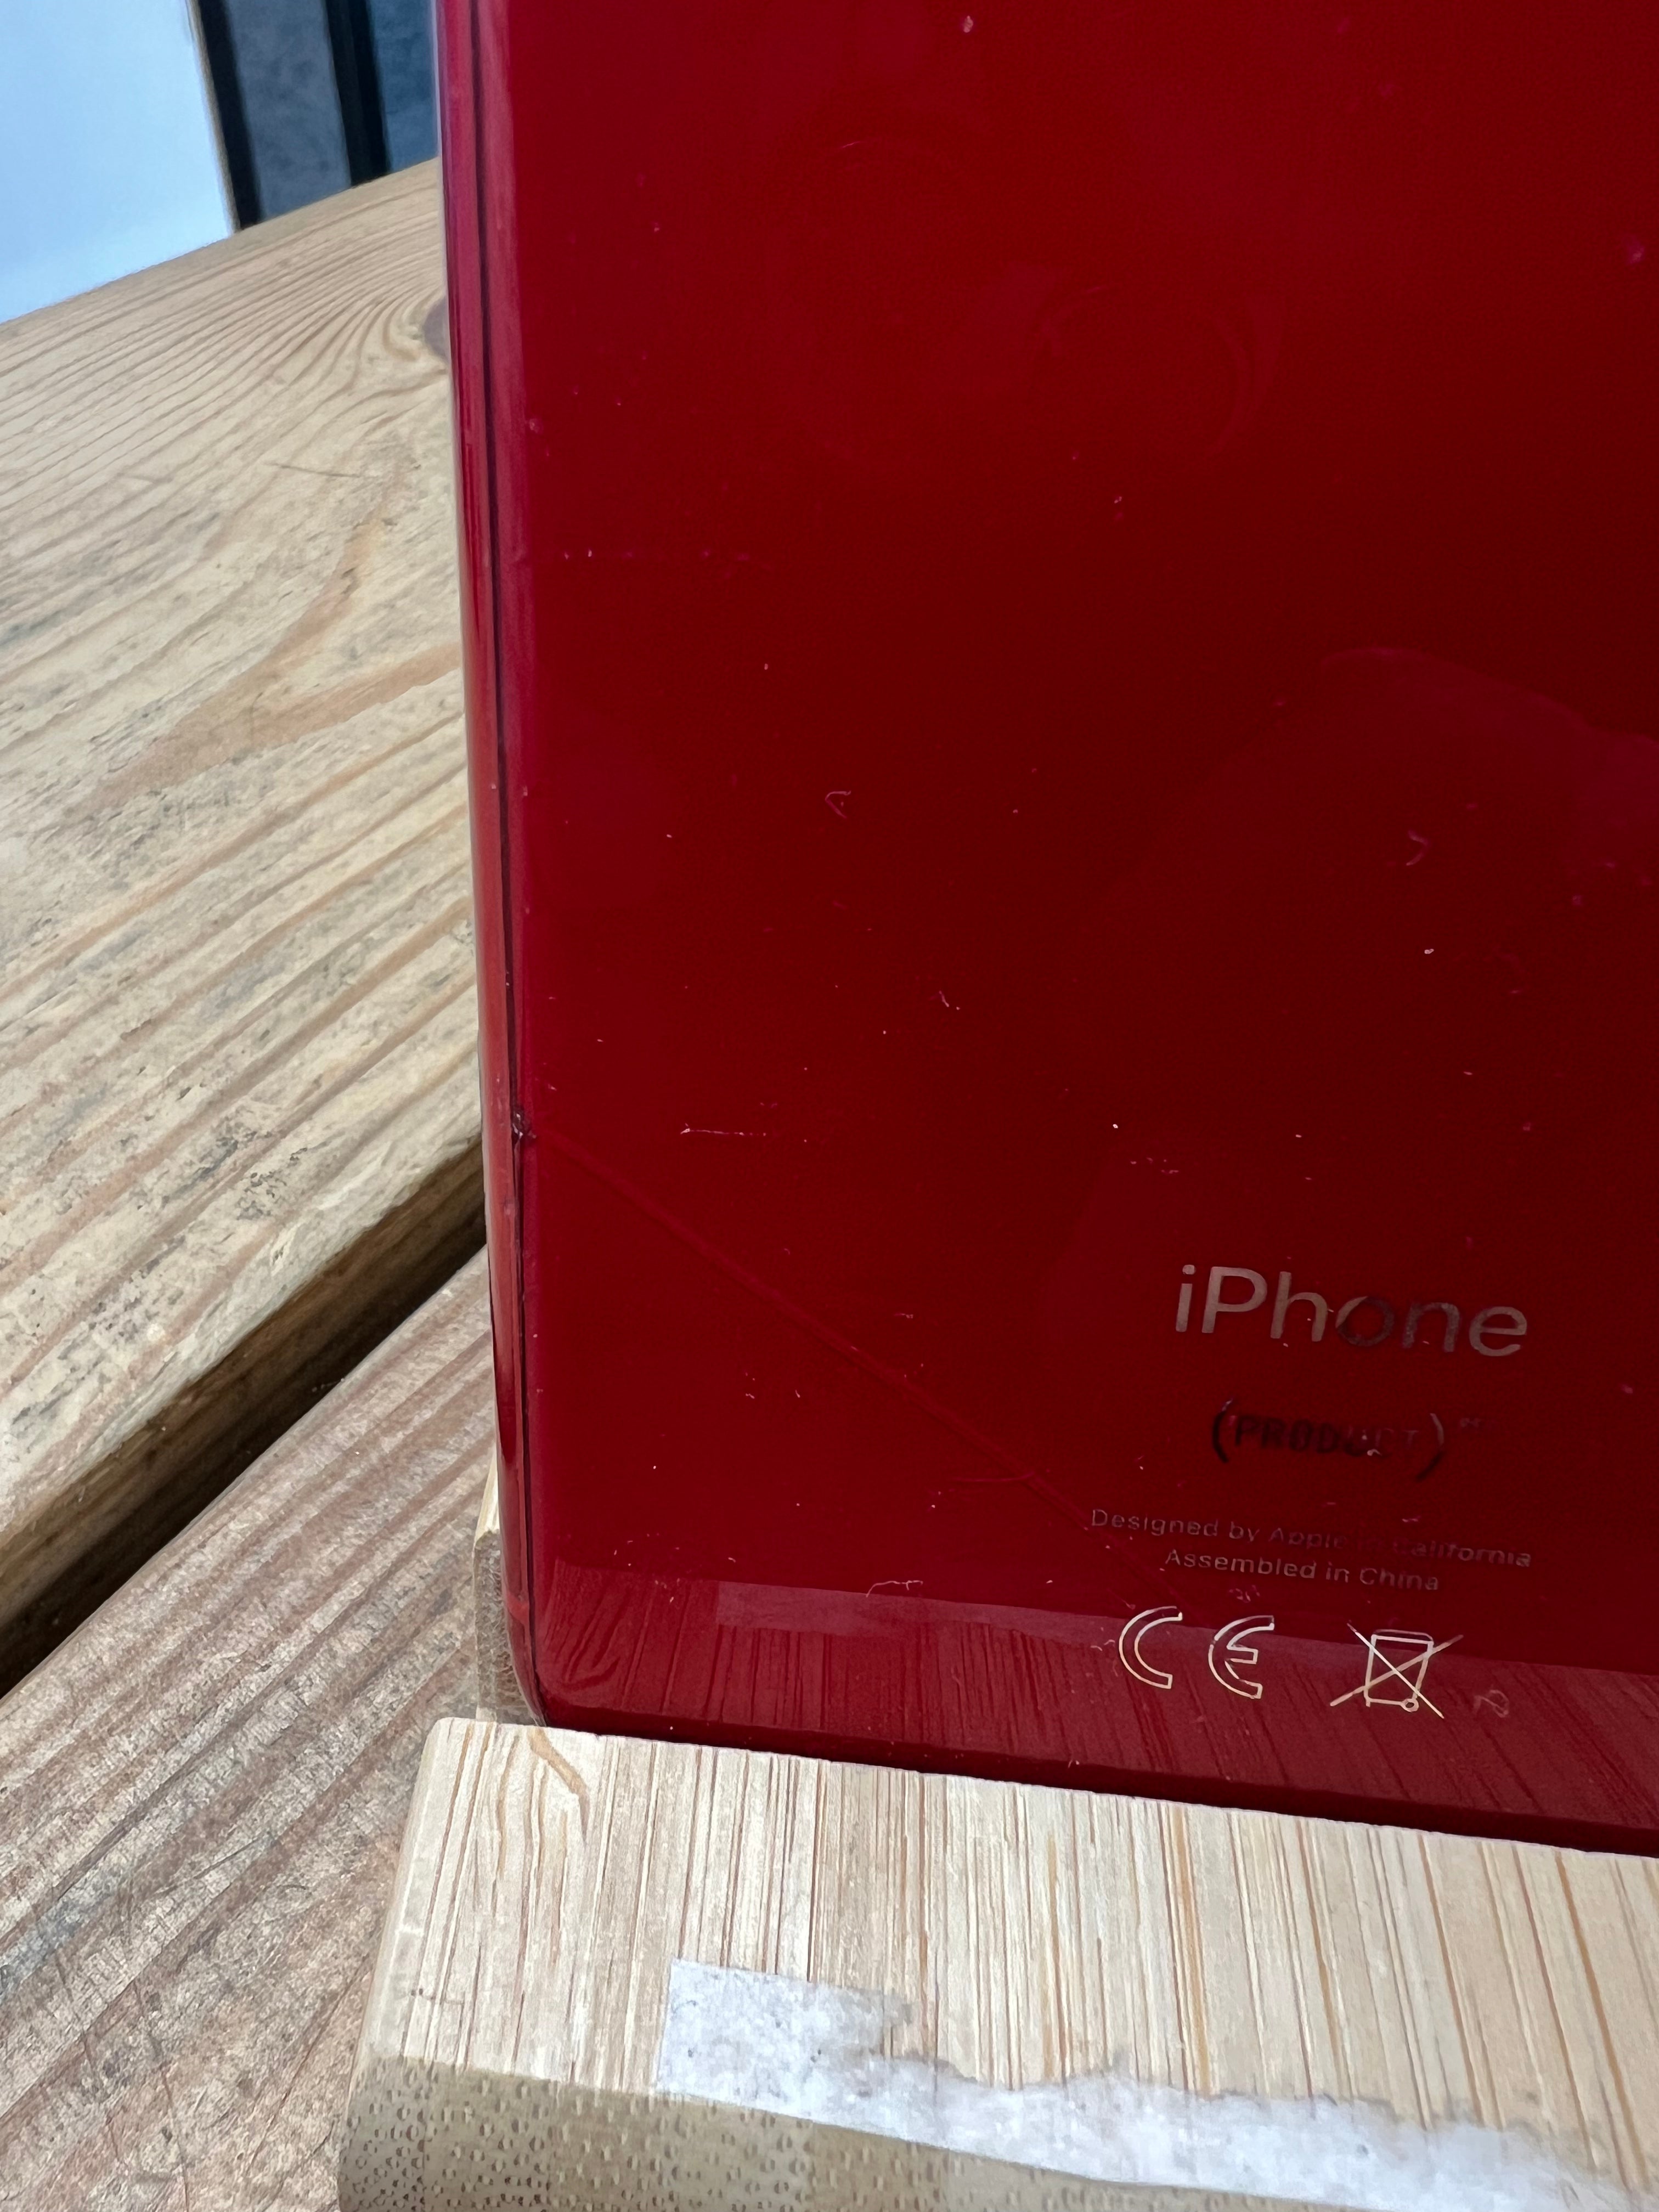 iPhone XR - 64gb- Red